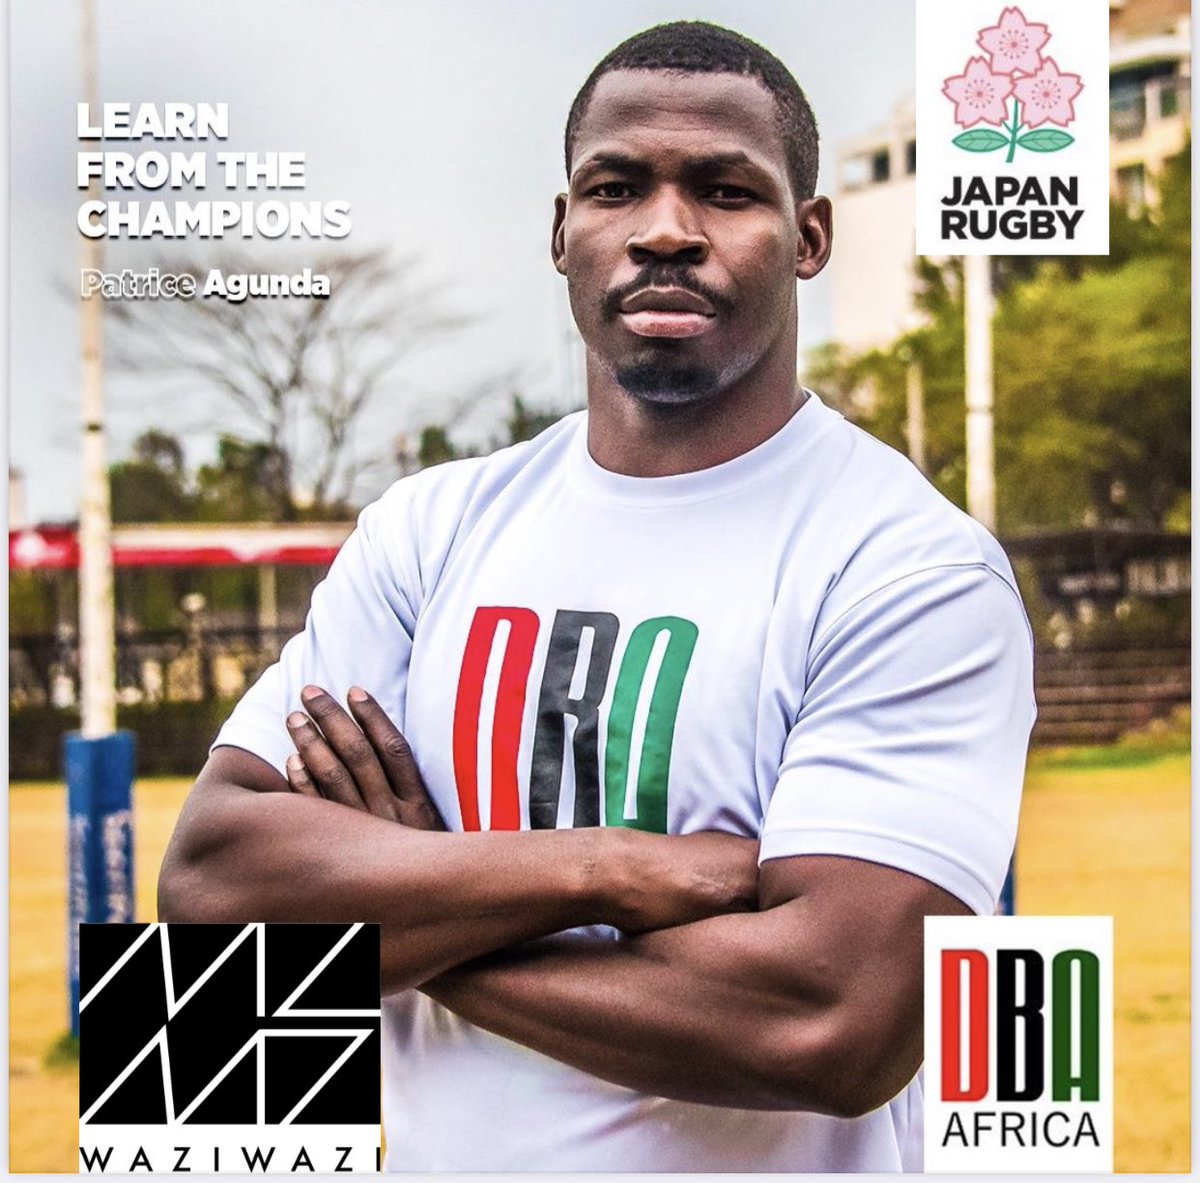 DBA are delighted to announce a partnership with Japanese company Wazi Wazi, whereby DBA Coach @patriceagunda will have a 32 day coaching exchange programme with the Japanese National Rugby Team, under Eddy Jones and Toshiaki Hirose. #rugbydevelopment #coach #japanrugby